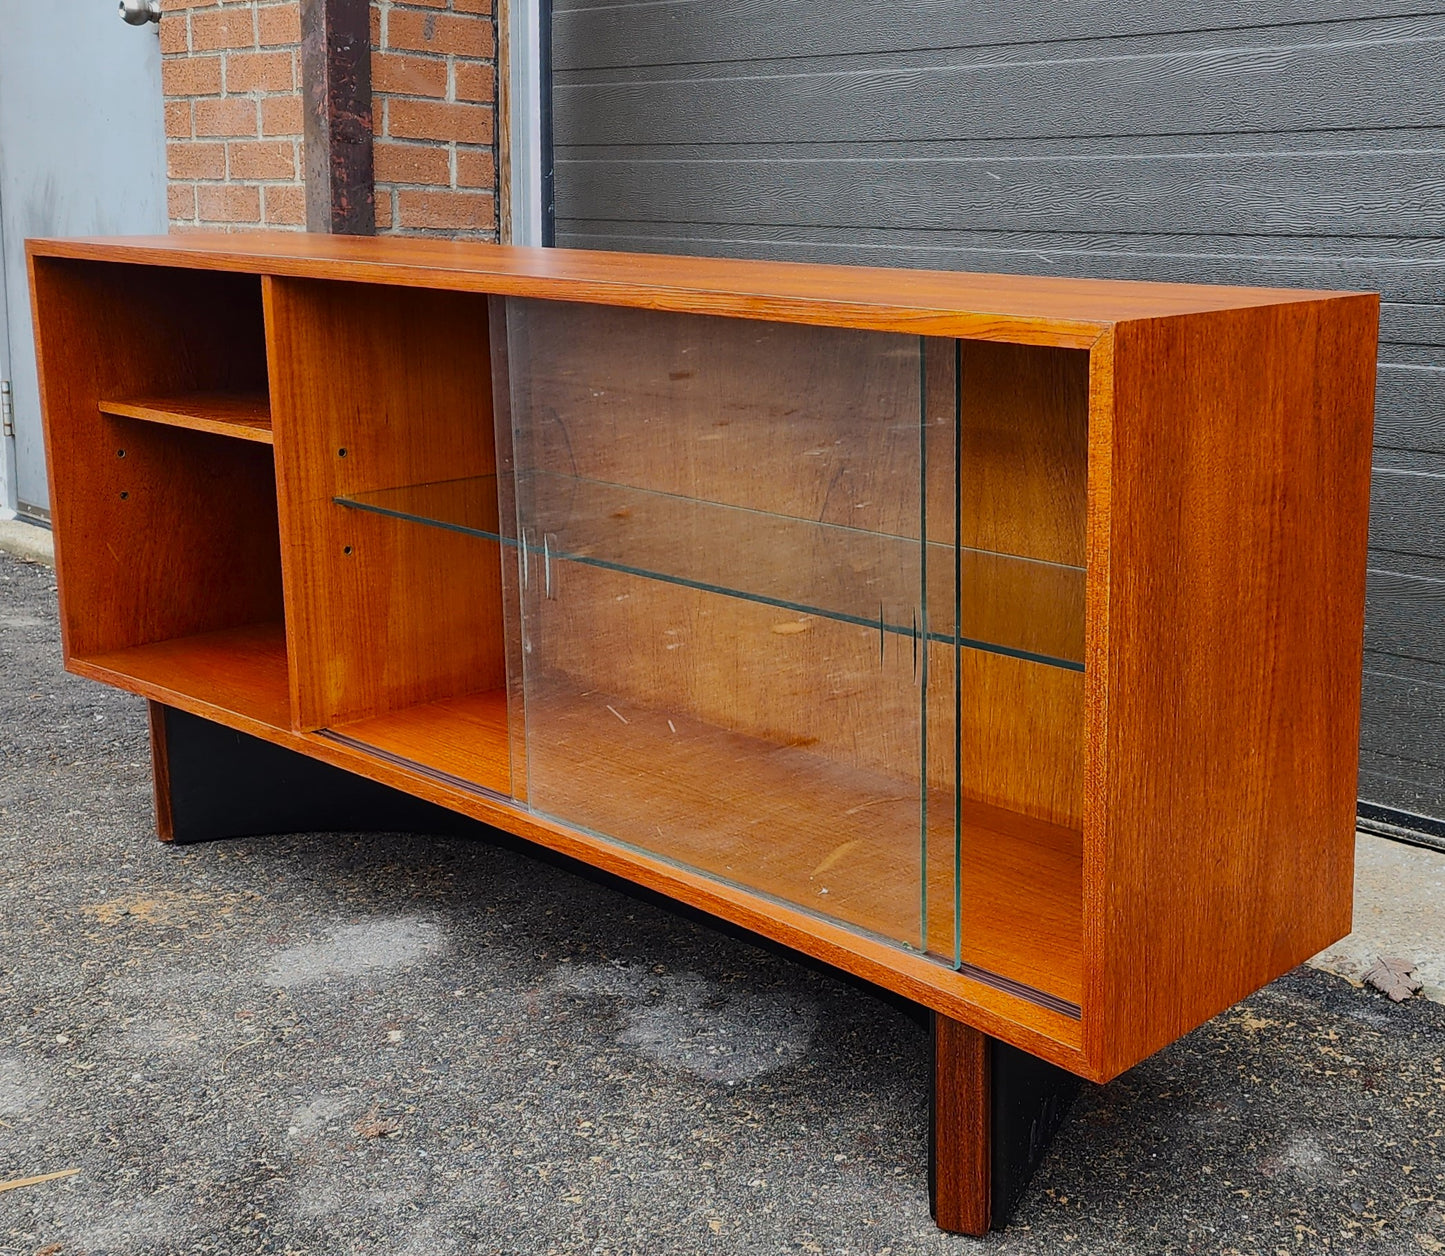 REFINISHED Mid Century Modern teak console 60" by RS Associates